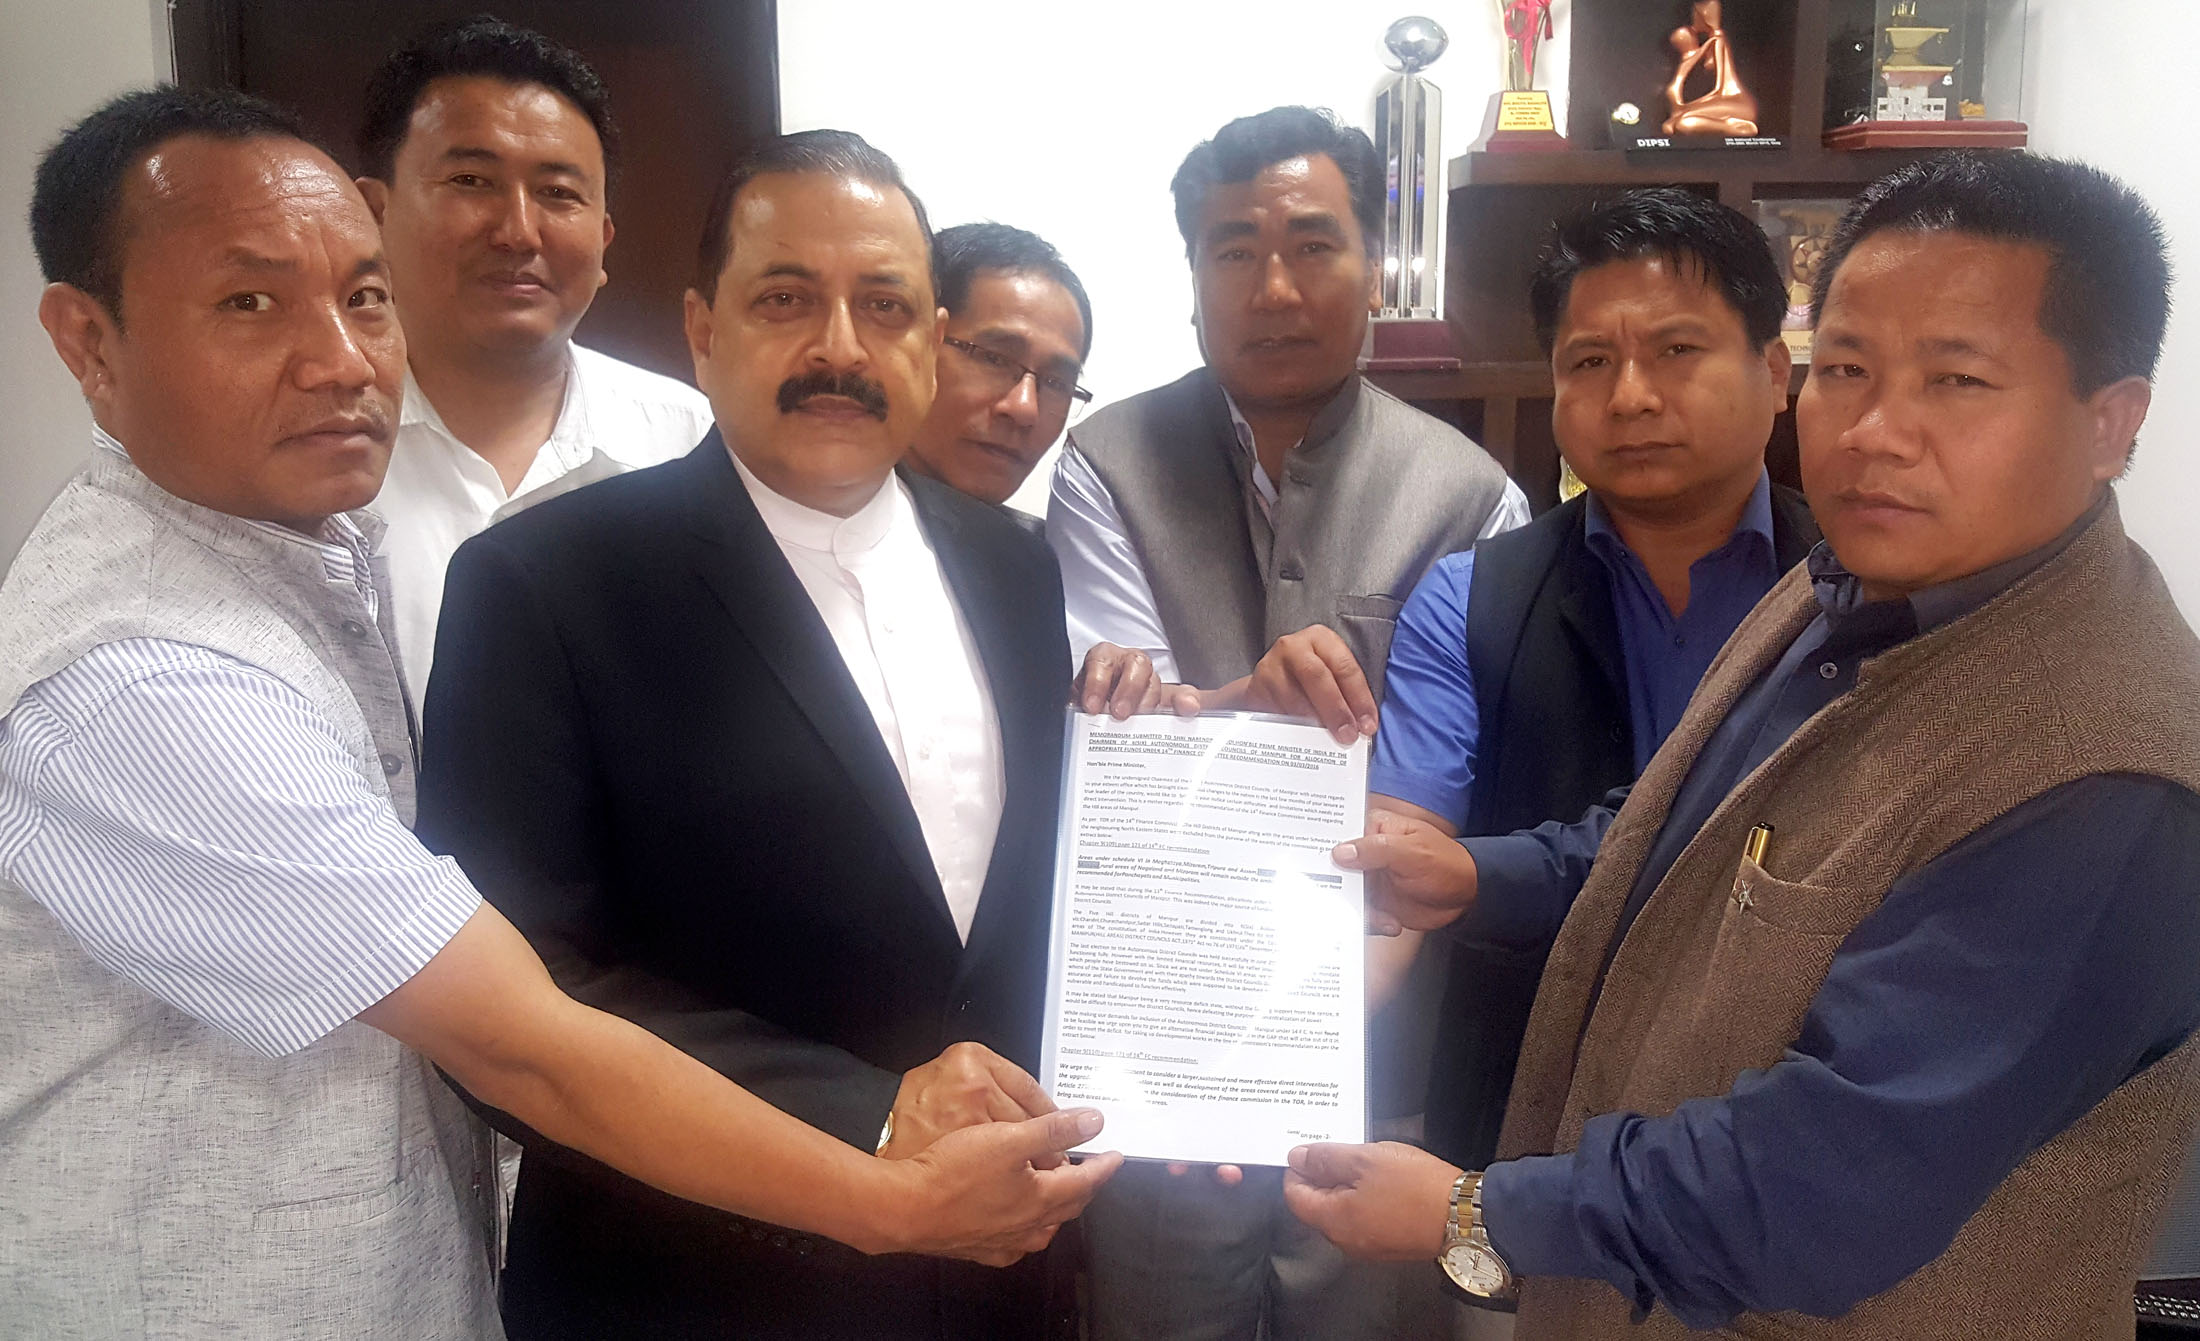 Dr. Jitendra Singh receiving a memorandum from a delegation of Manipur Councilors representing the six Autonomous District Councils of Manipur, in New Delhi on March 06, 2016.